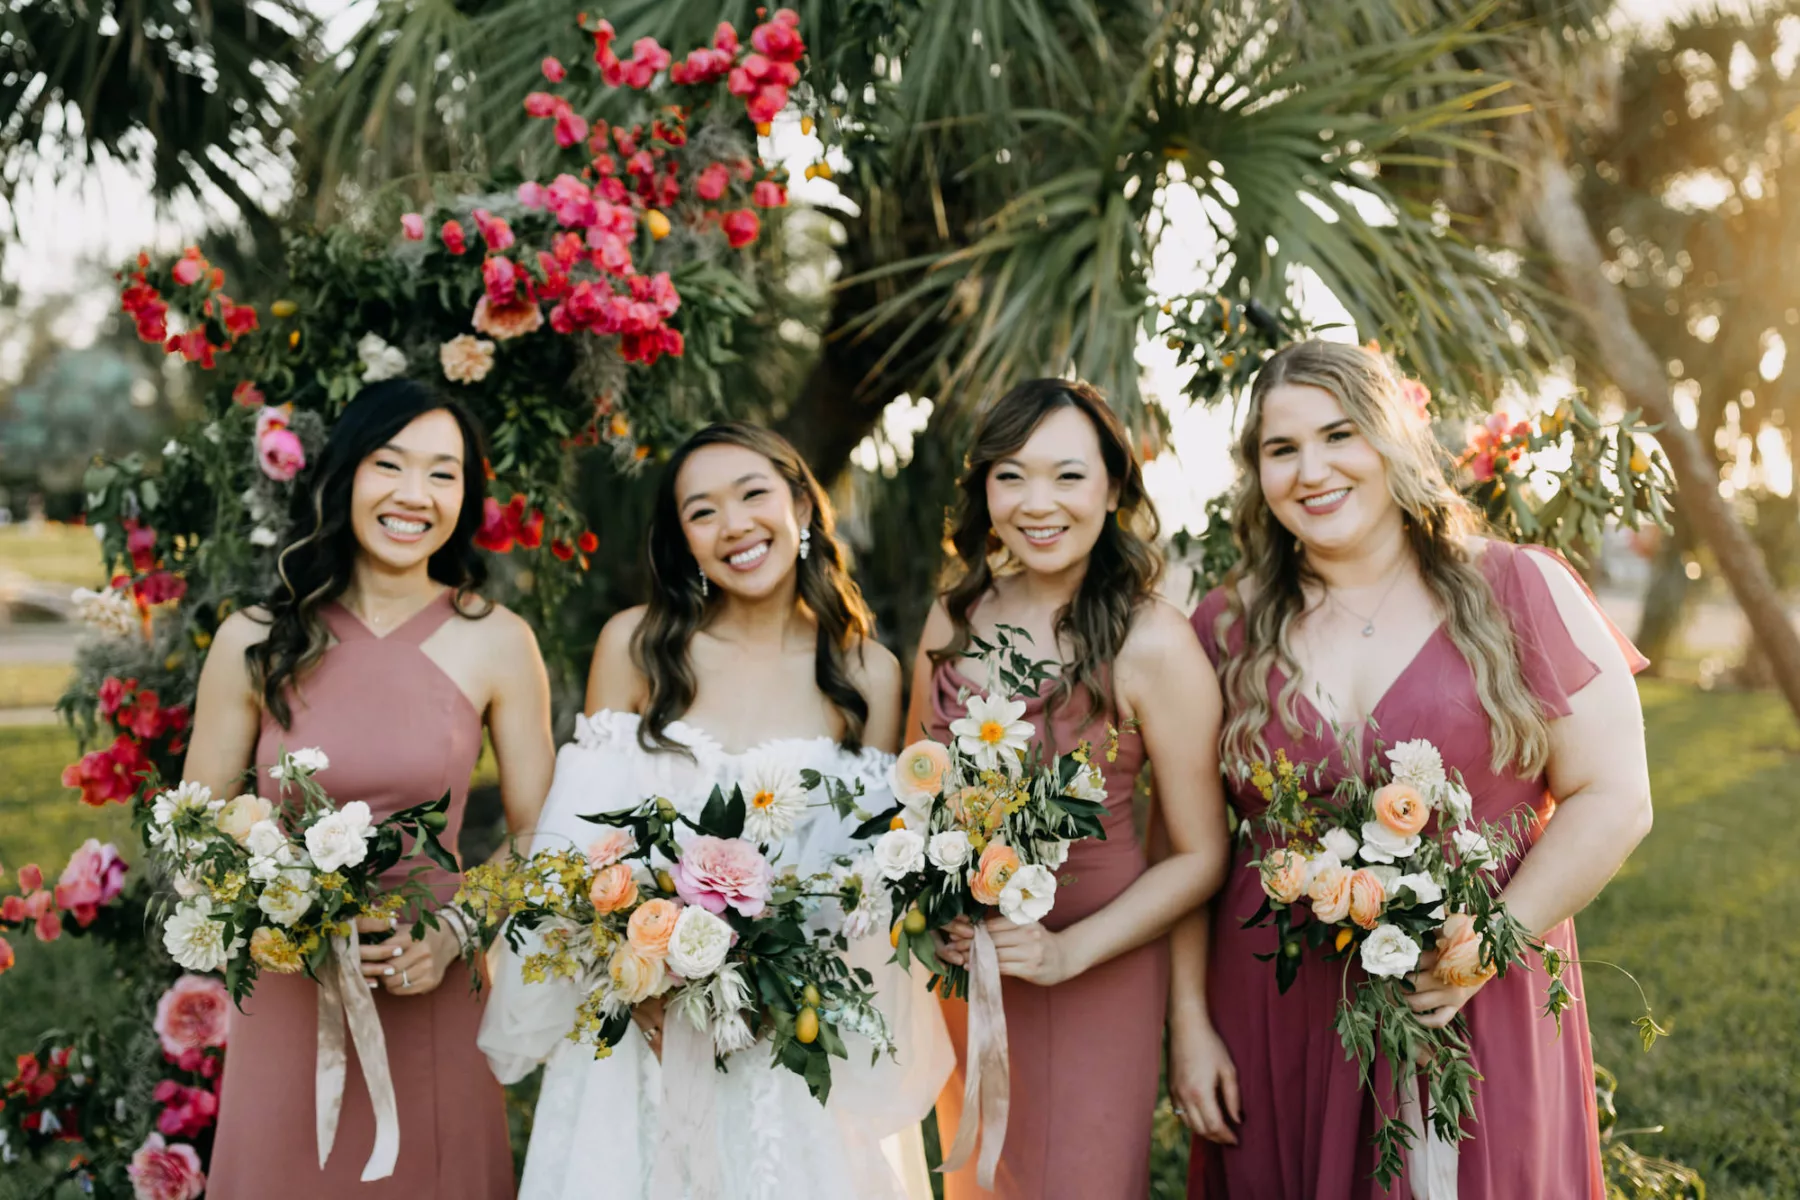 Mismatched Pink Bridesmaid Wedding Dress Ideas | Old Florida Bridal Bouquet with Pink Roses, Orange Anemones, White Chrysanthemums, and Greenery Floral Arrangement Inspiration | Tampa Bay Hair and Makeup Artist Femme Akoi Beauty Studio | Photographer Amber McWhorter Photography